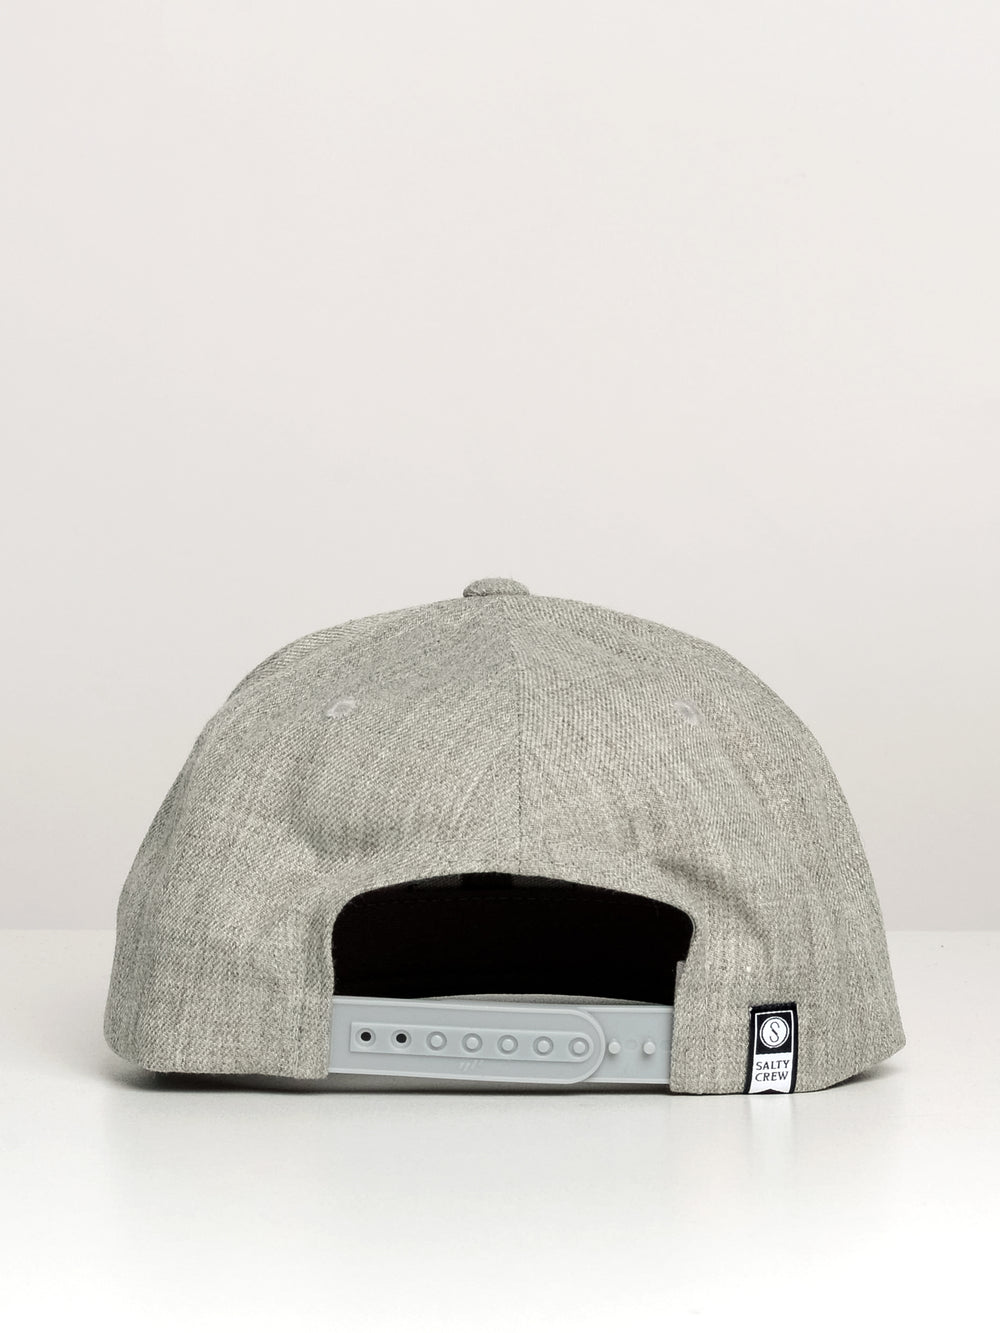 SALTY CREW BRUCE 6 PANEL - CLEARANCE